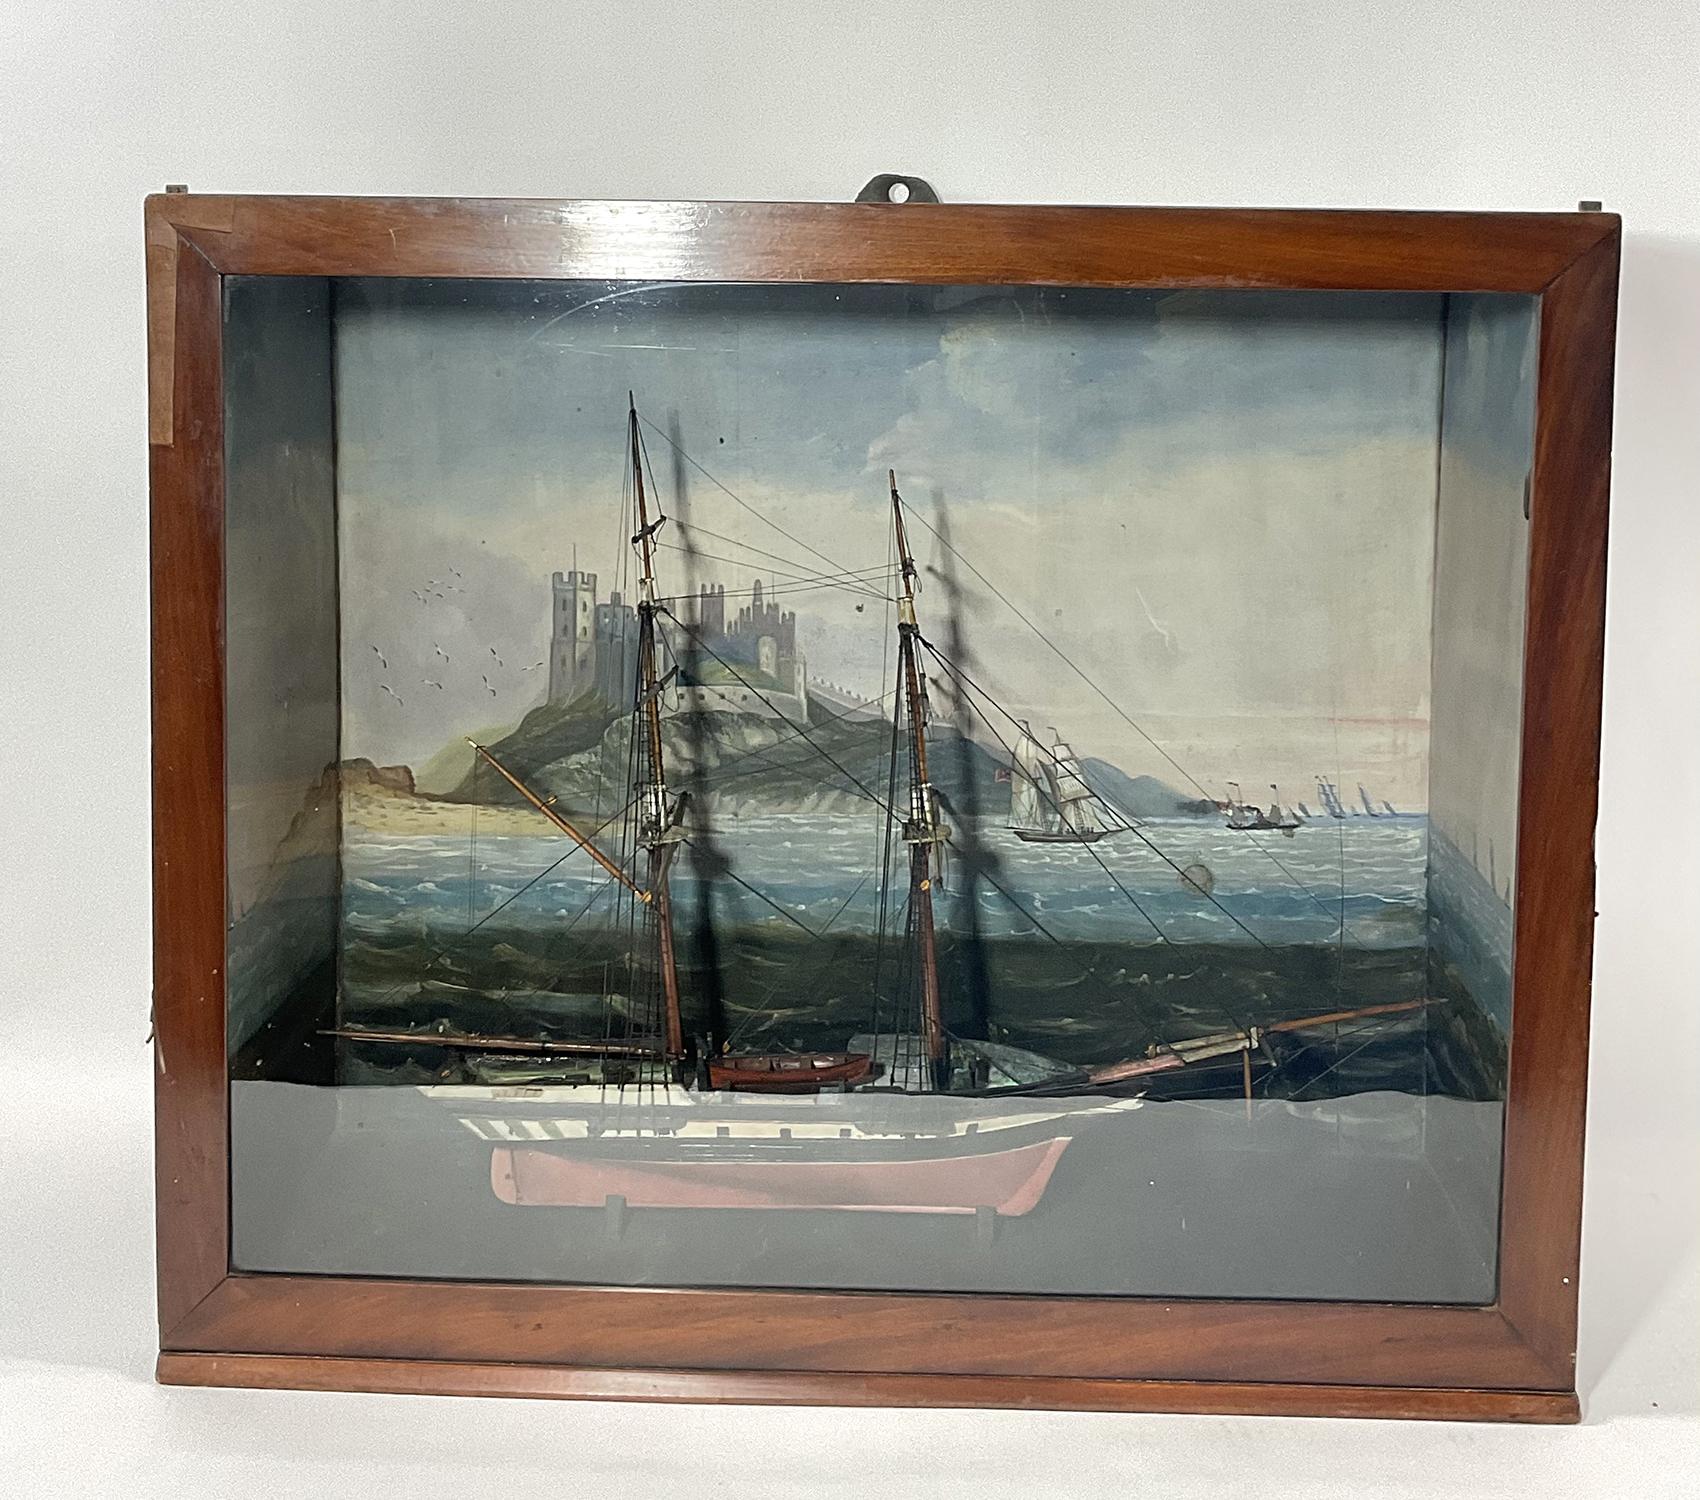 Nineteenth century model of the merchant Brig Alice with painted gunports, figurehead, quarter galleries, etc.. The inside of the shadow box is painted with a European castle, other sailboats, distant mountains, ocean, etc. With glass front. Circa